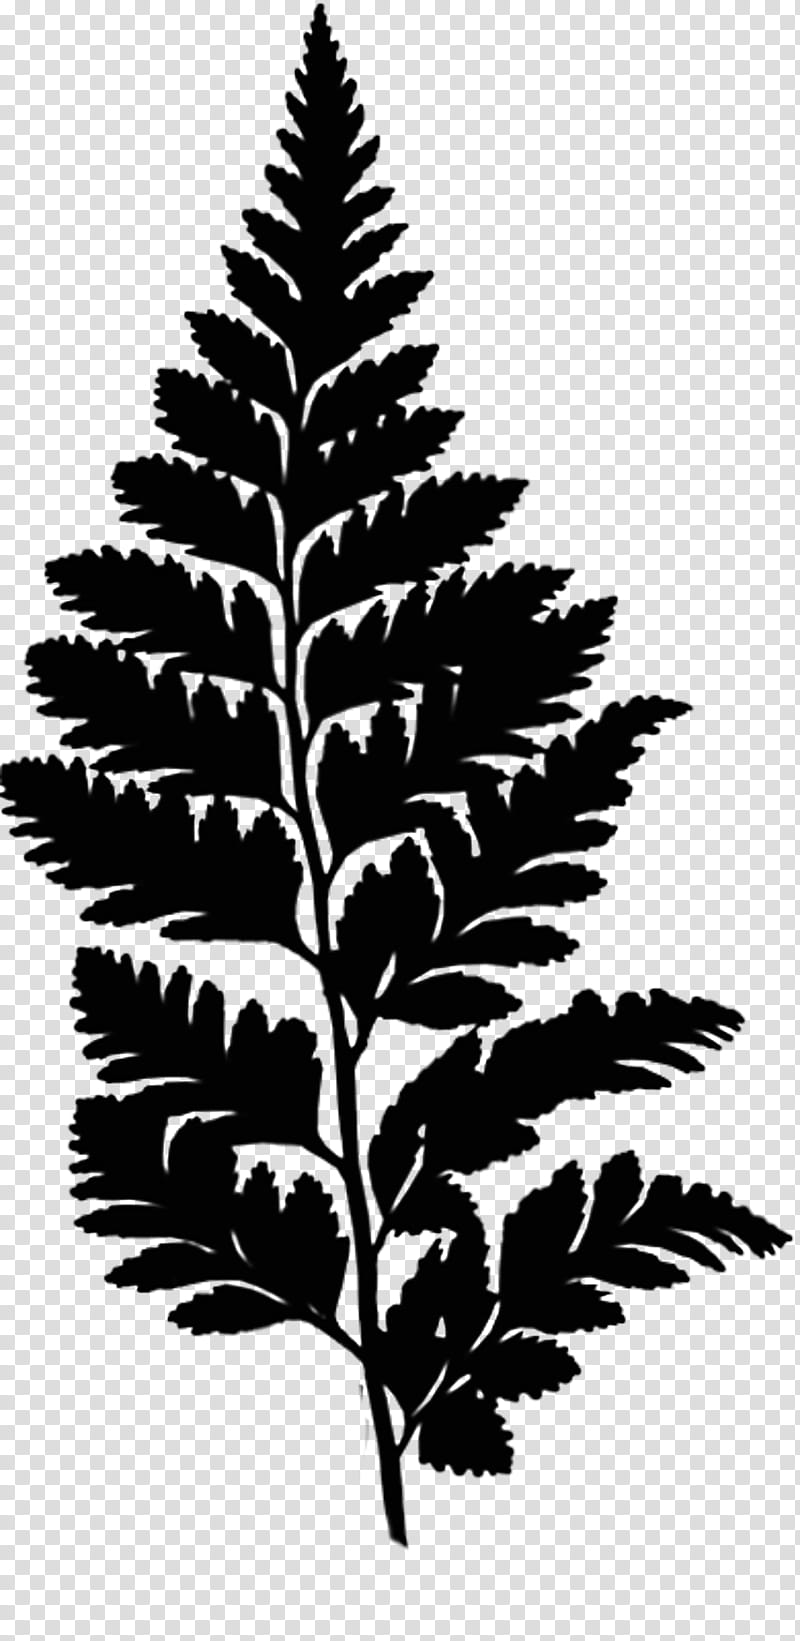 Twig, Fern, Ostrich Fern, Leaf, Plants, Drawing, Vascular Plant, Thorns Spines And Prickles transparent background PNG clipart